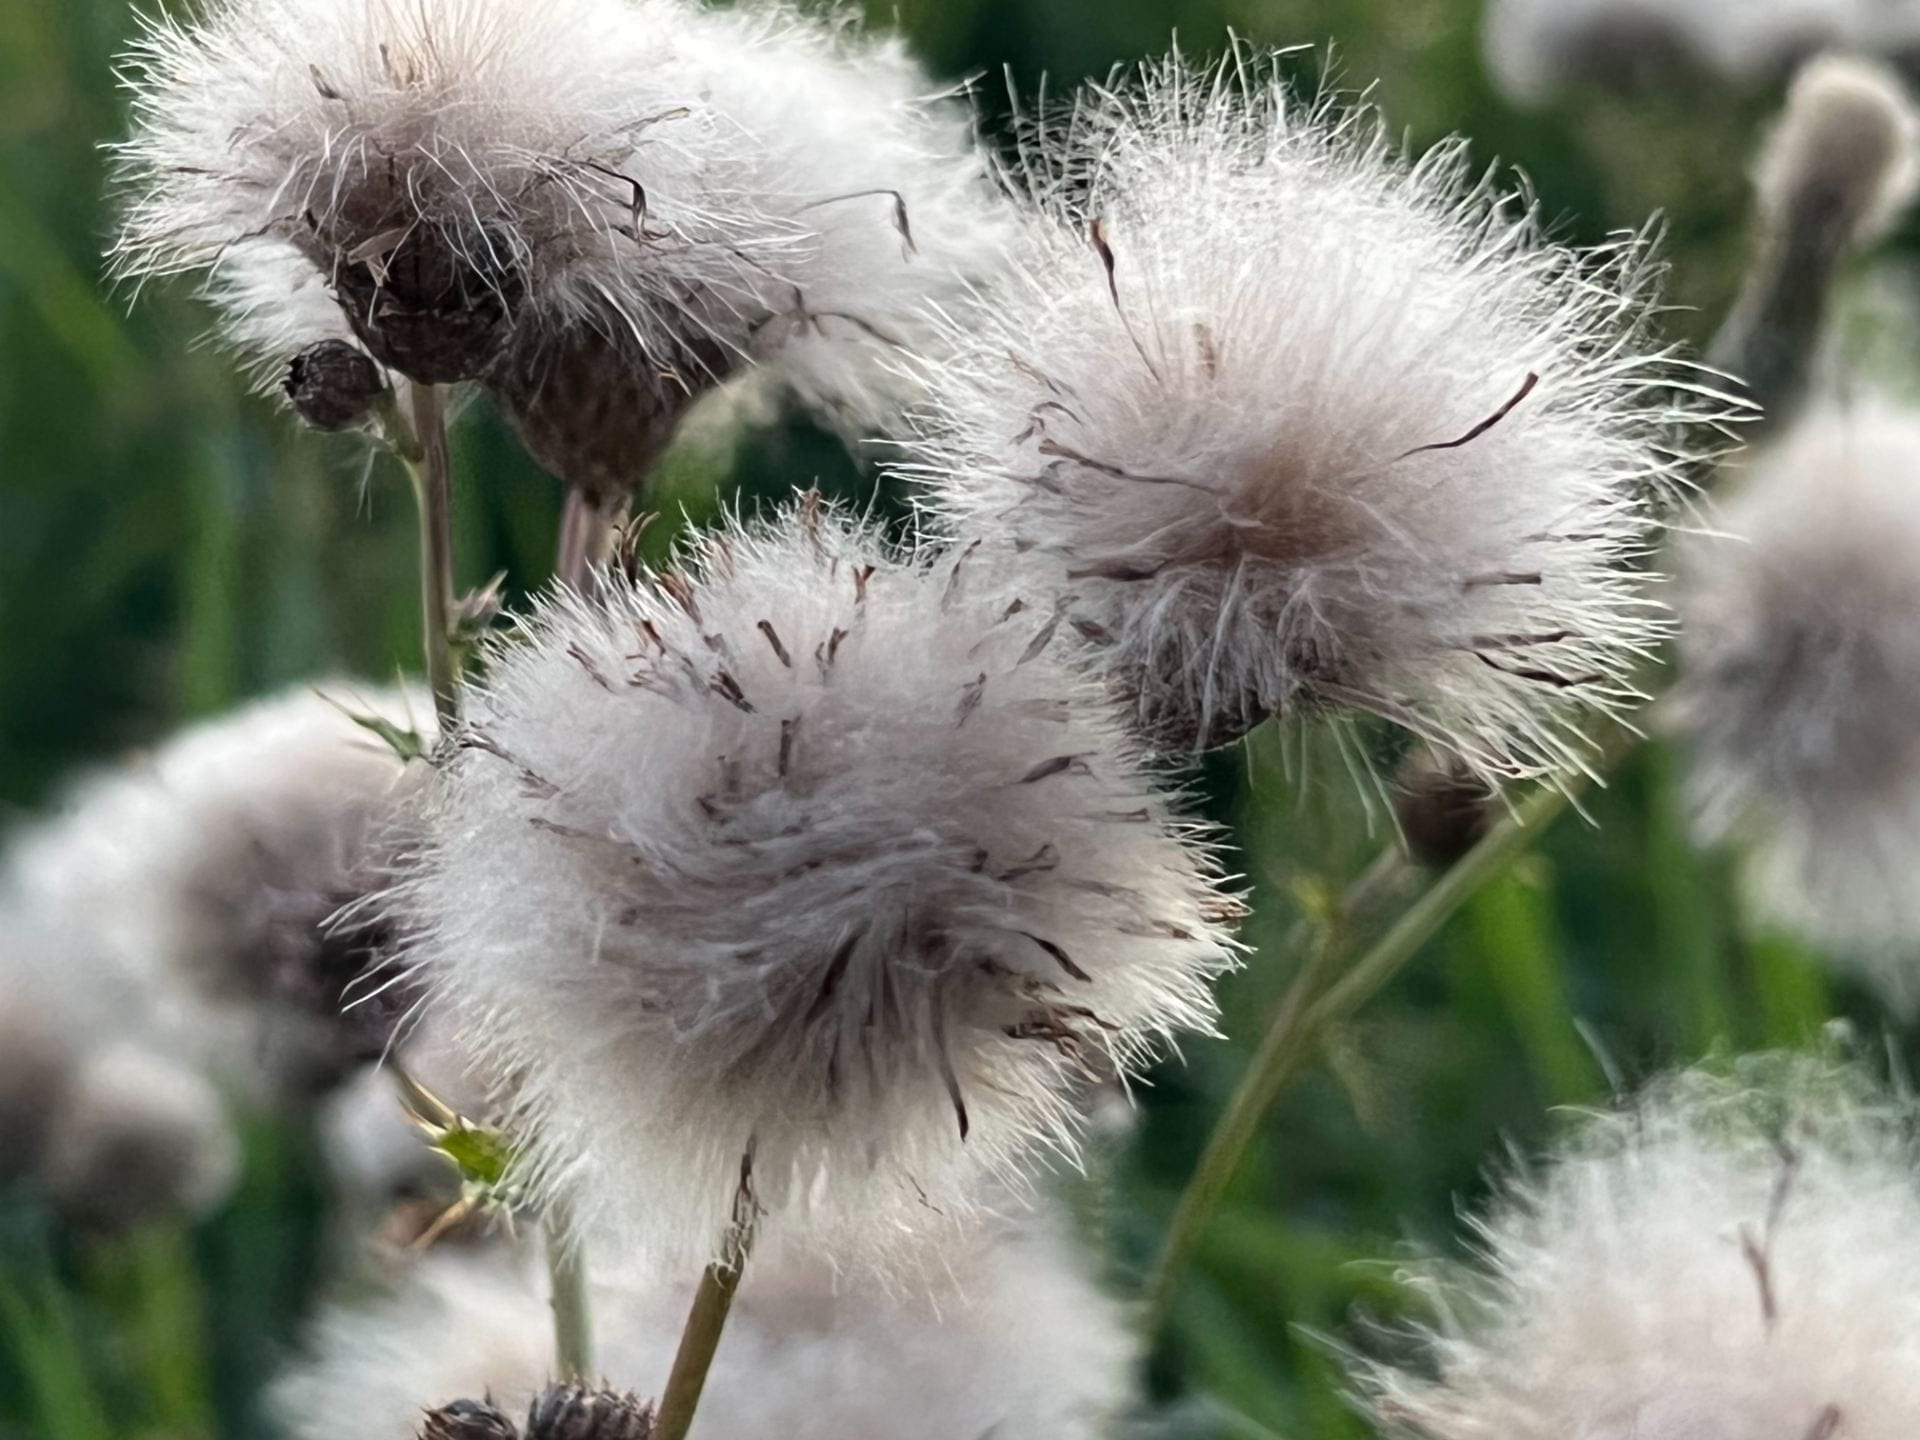 thistle seed heads